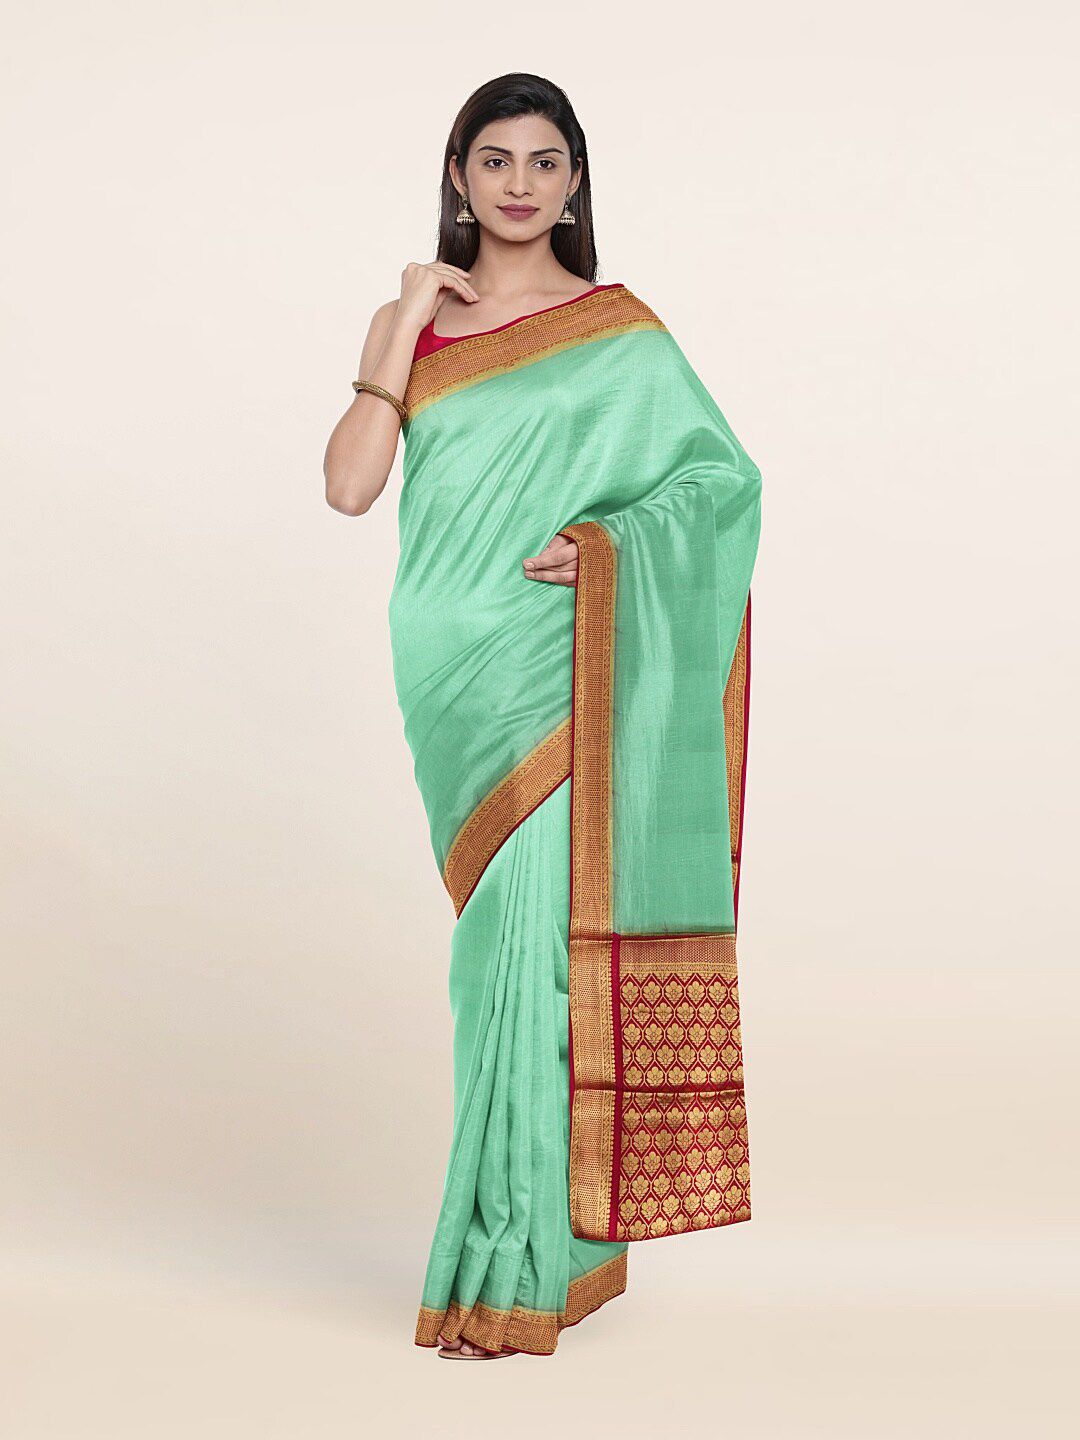 Pothys Green & Red Pure Silk Saree Price in India